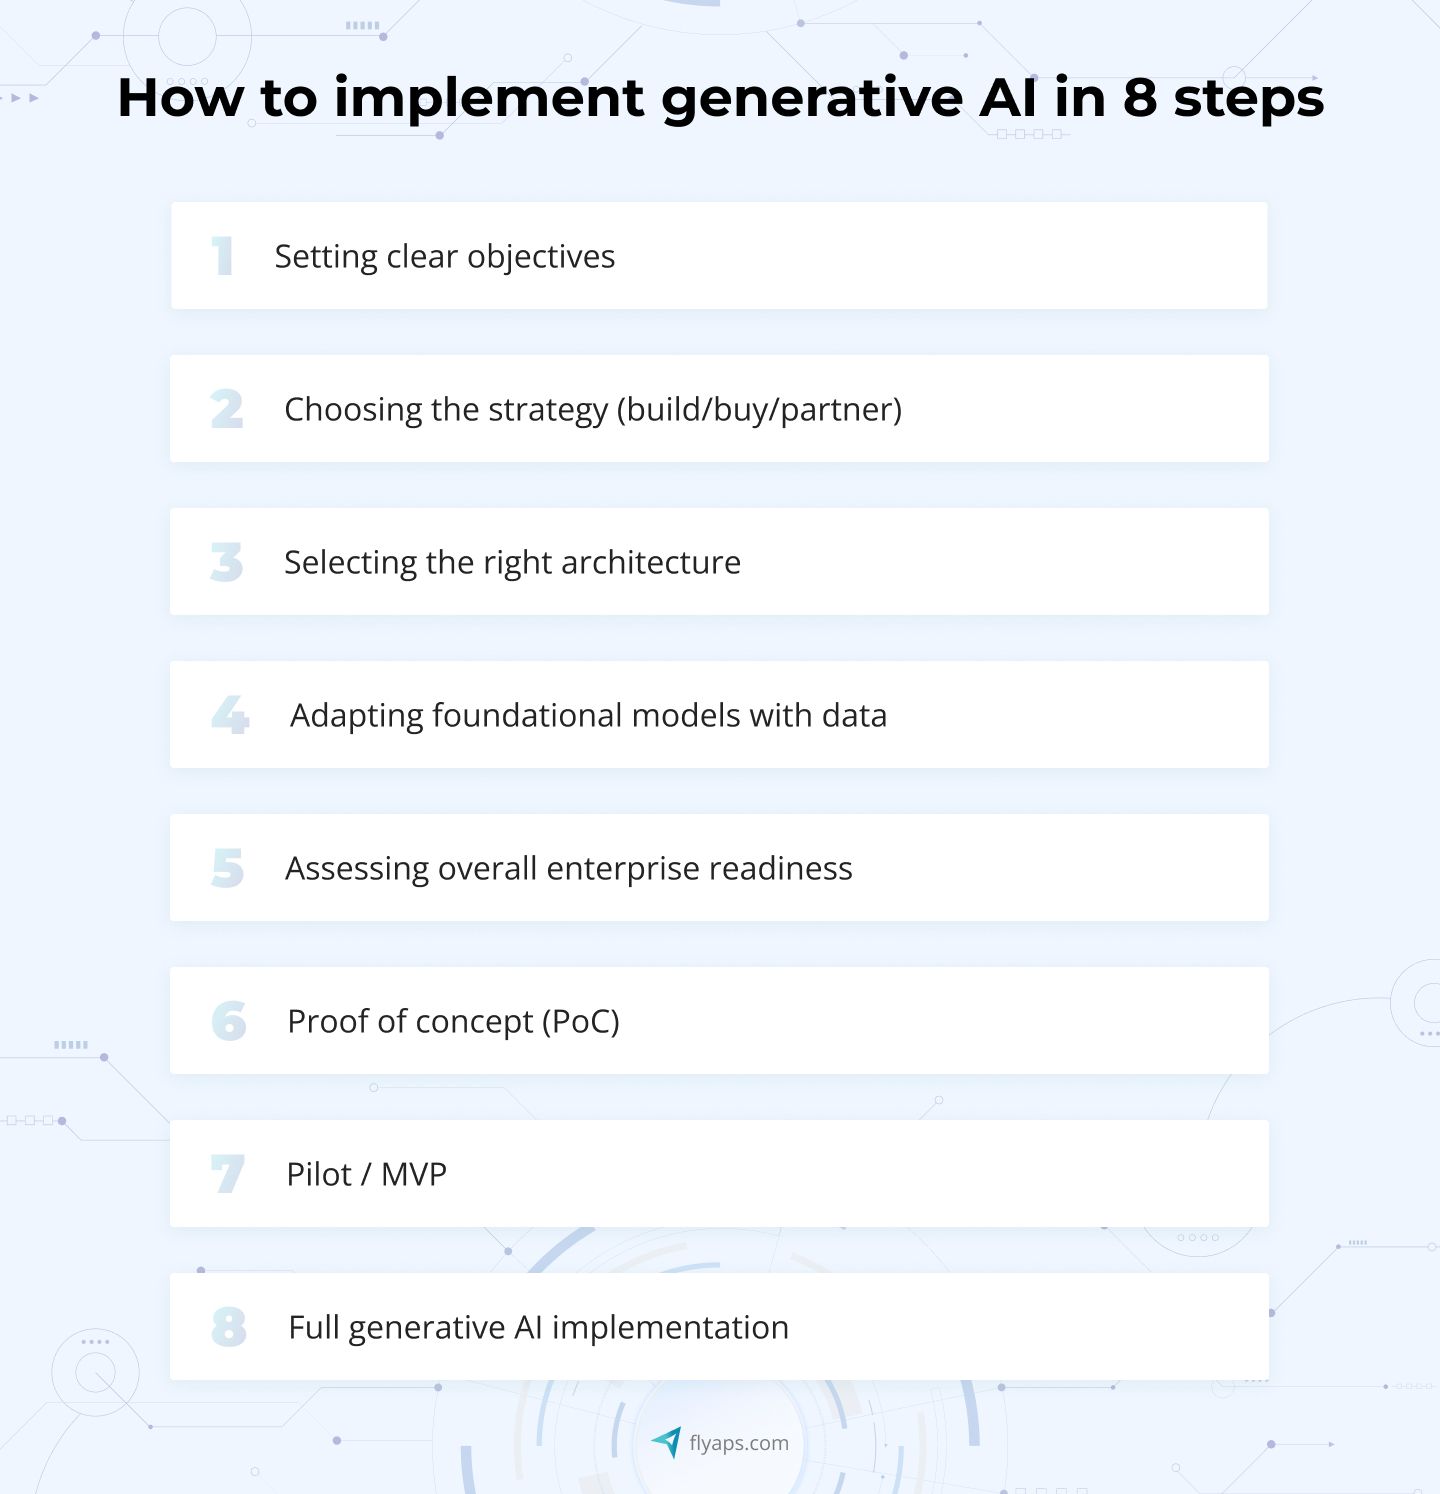 How to implement generative AI in 8 steps